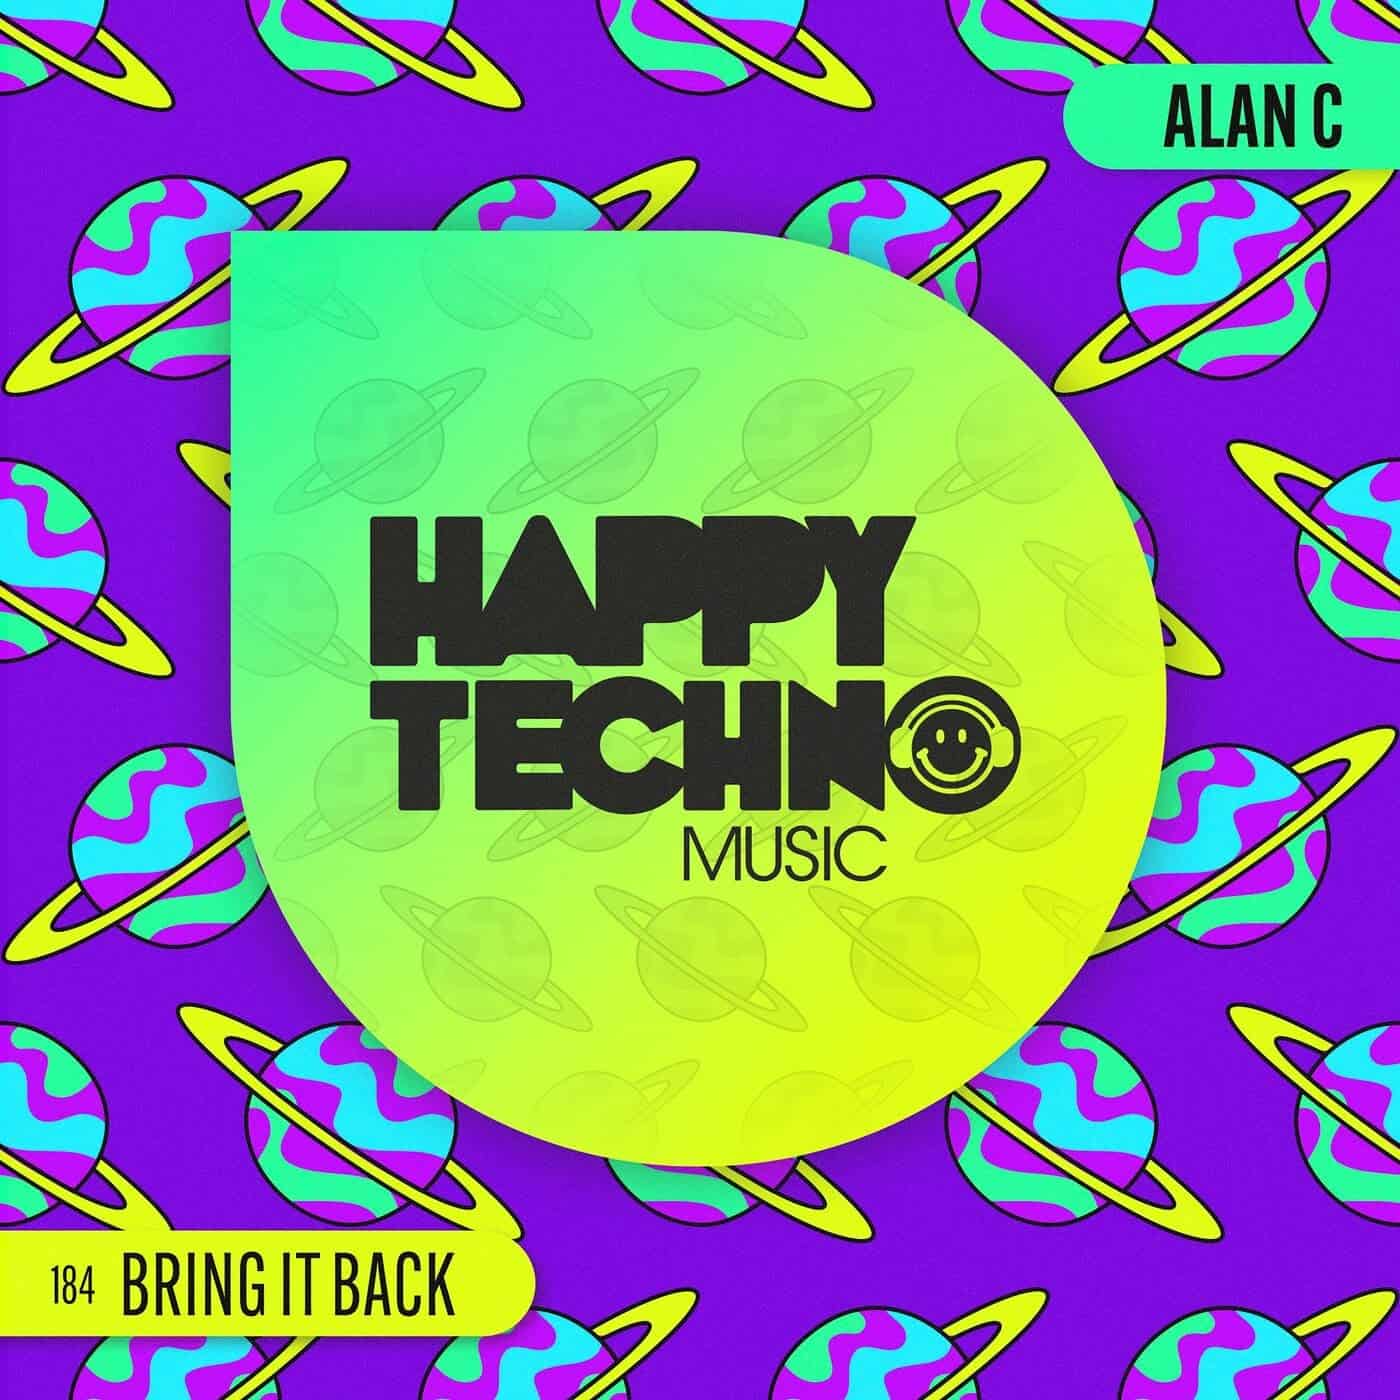 image cover: Alan C - Bring It Back by Happy Techno Music